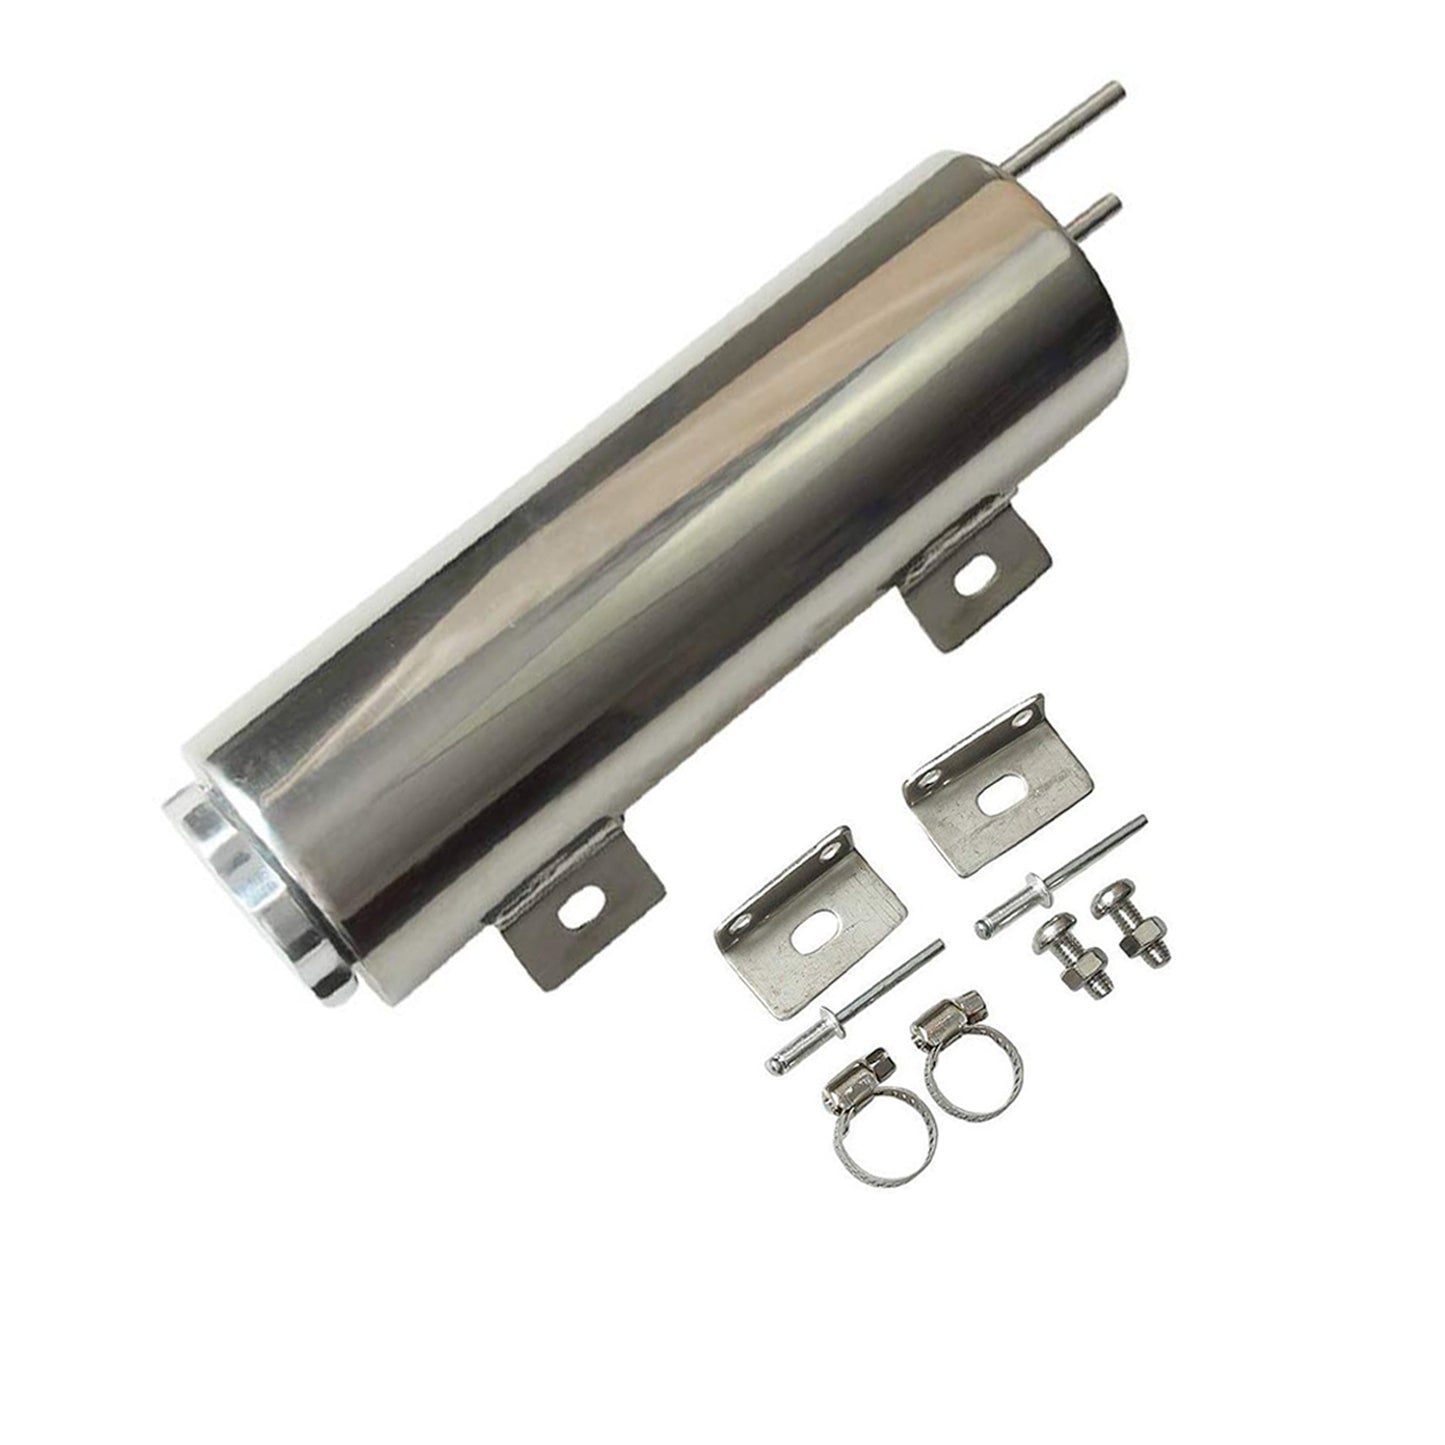 3"X 10" Inch Stainless Radiator Overflow Tank Universal Fit.